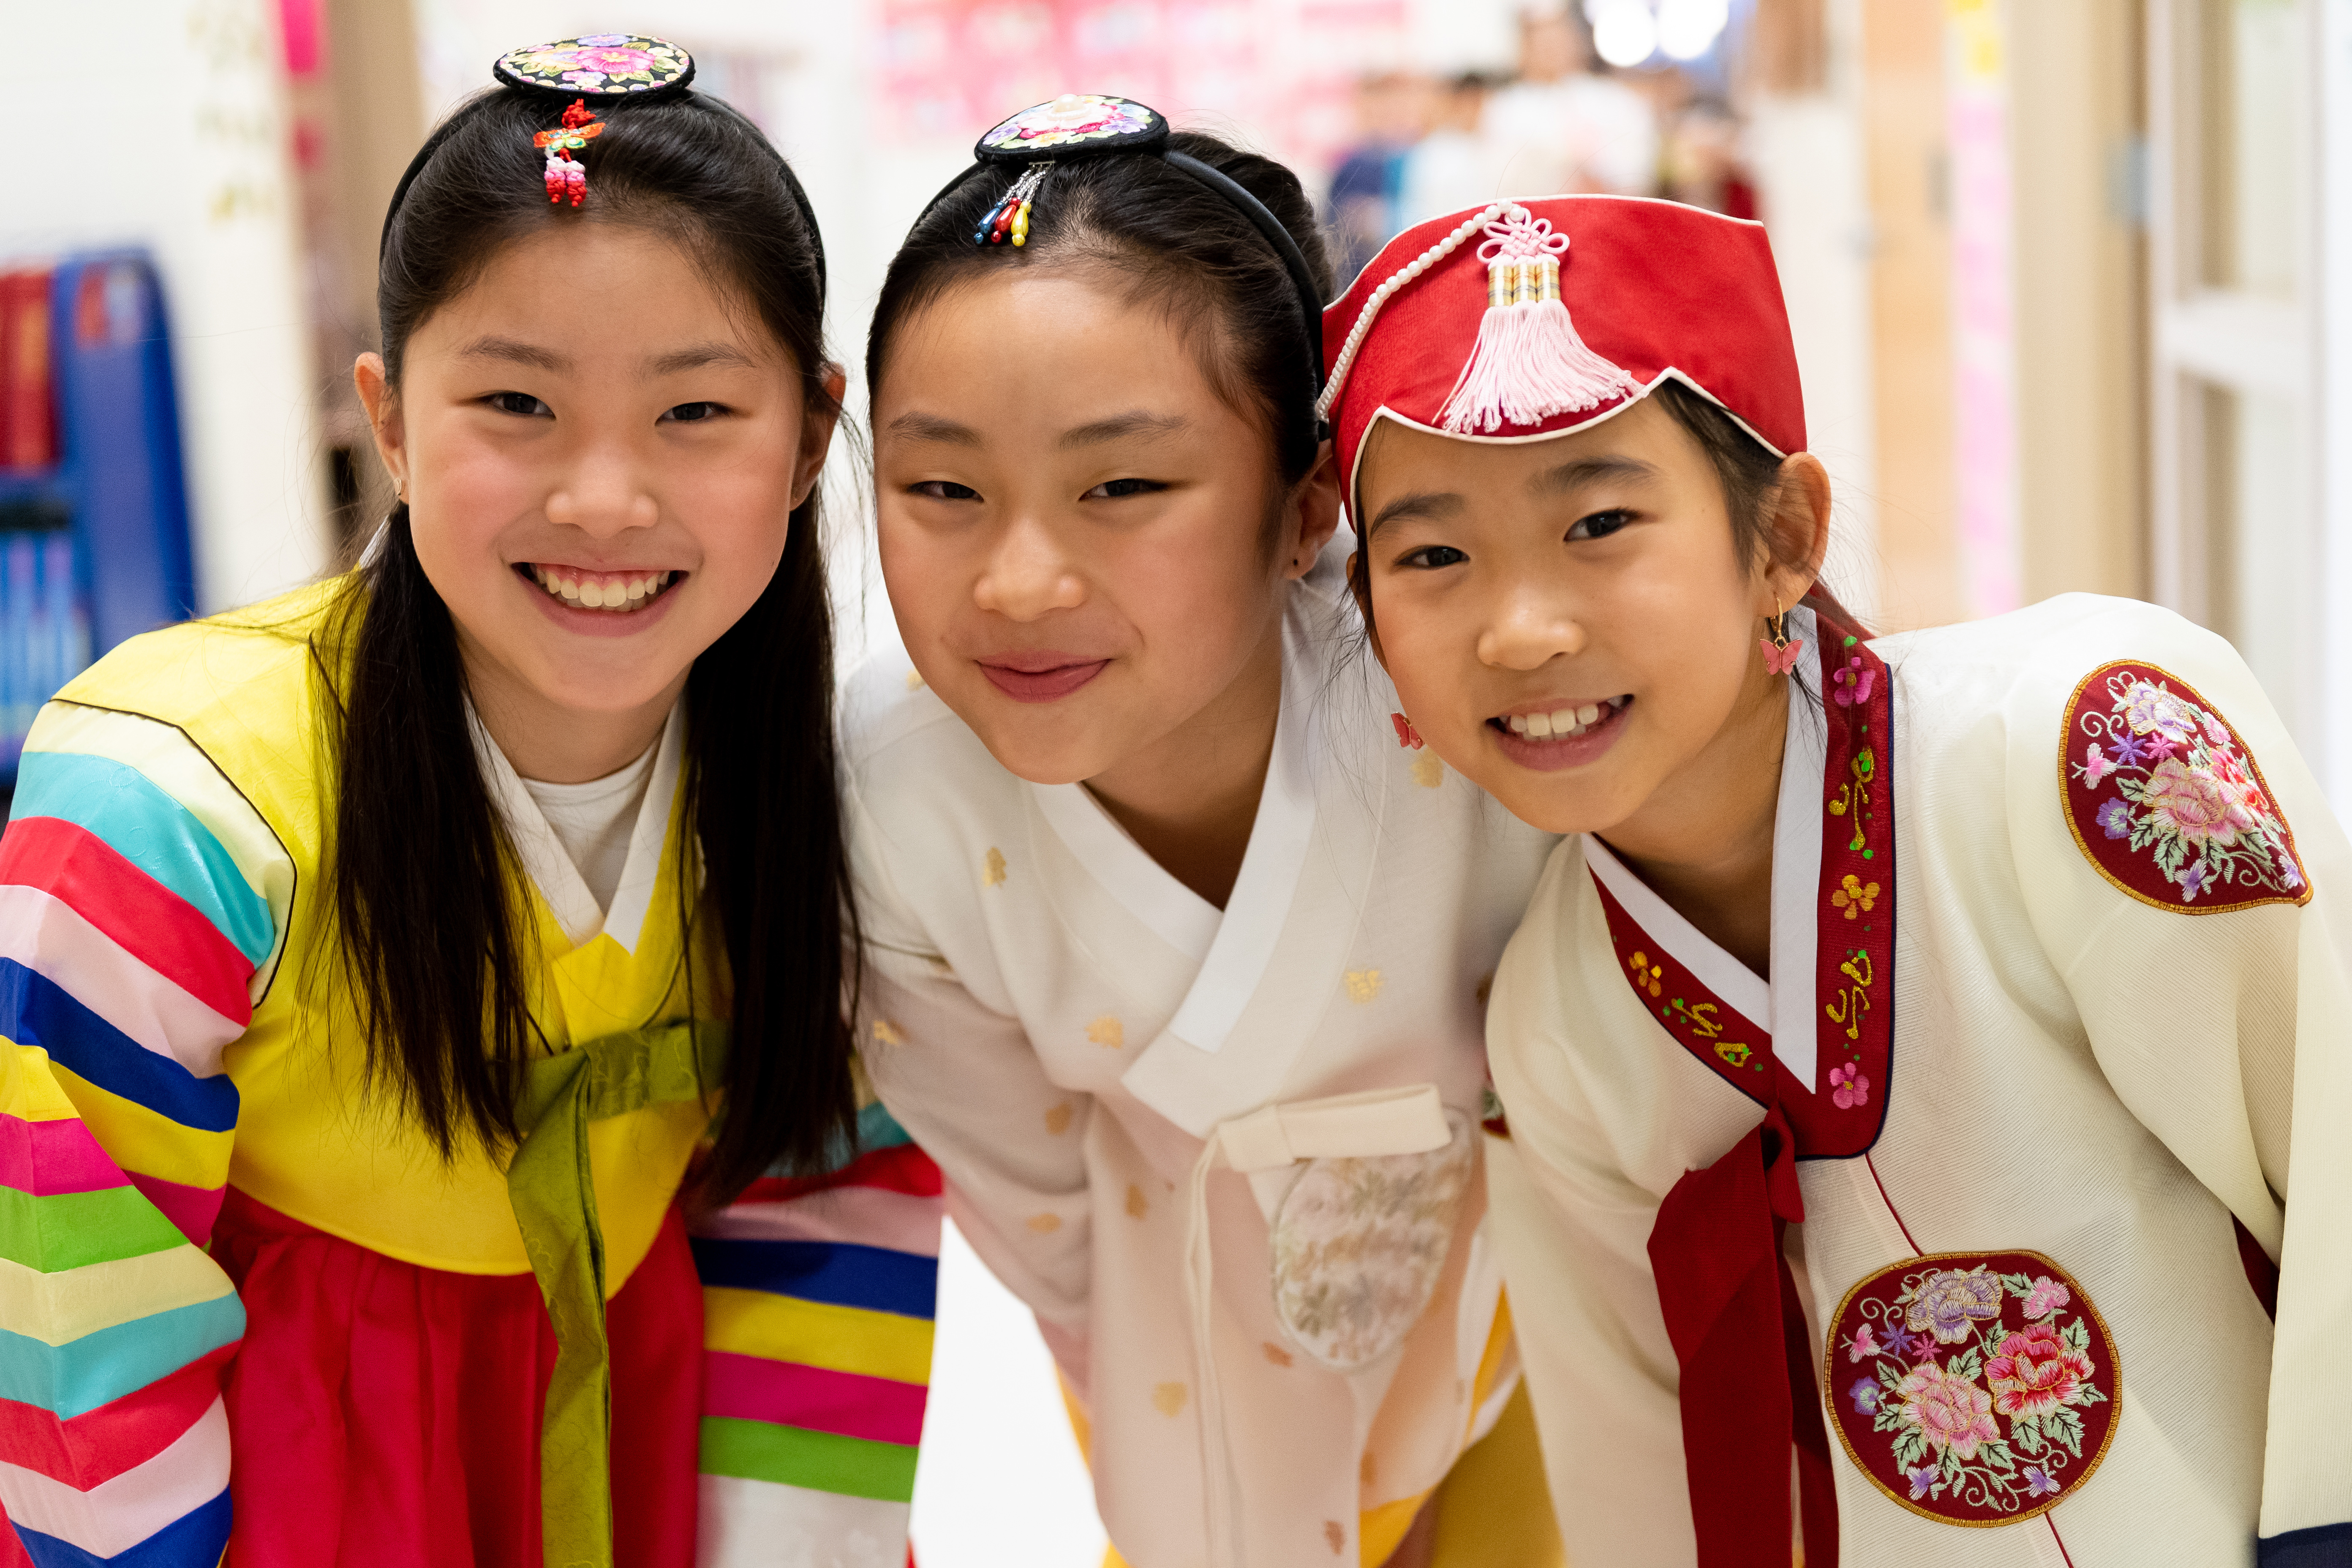 Three Powell Elementary students wear hanboks, or traditional Korean dresses, to celebrate to Lunar New Year.